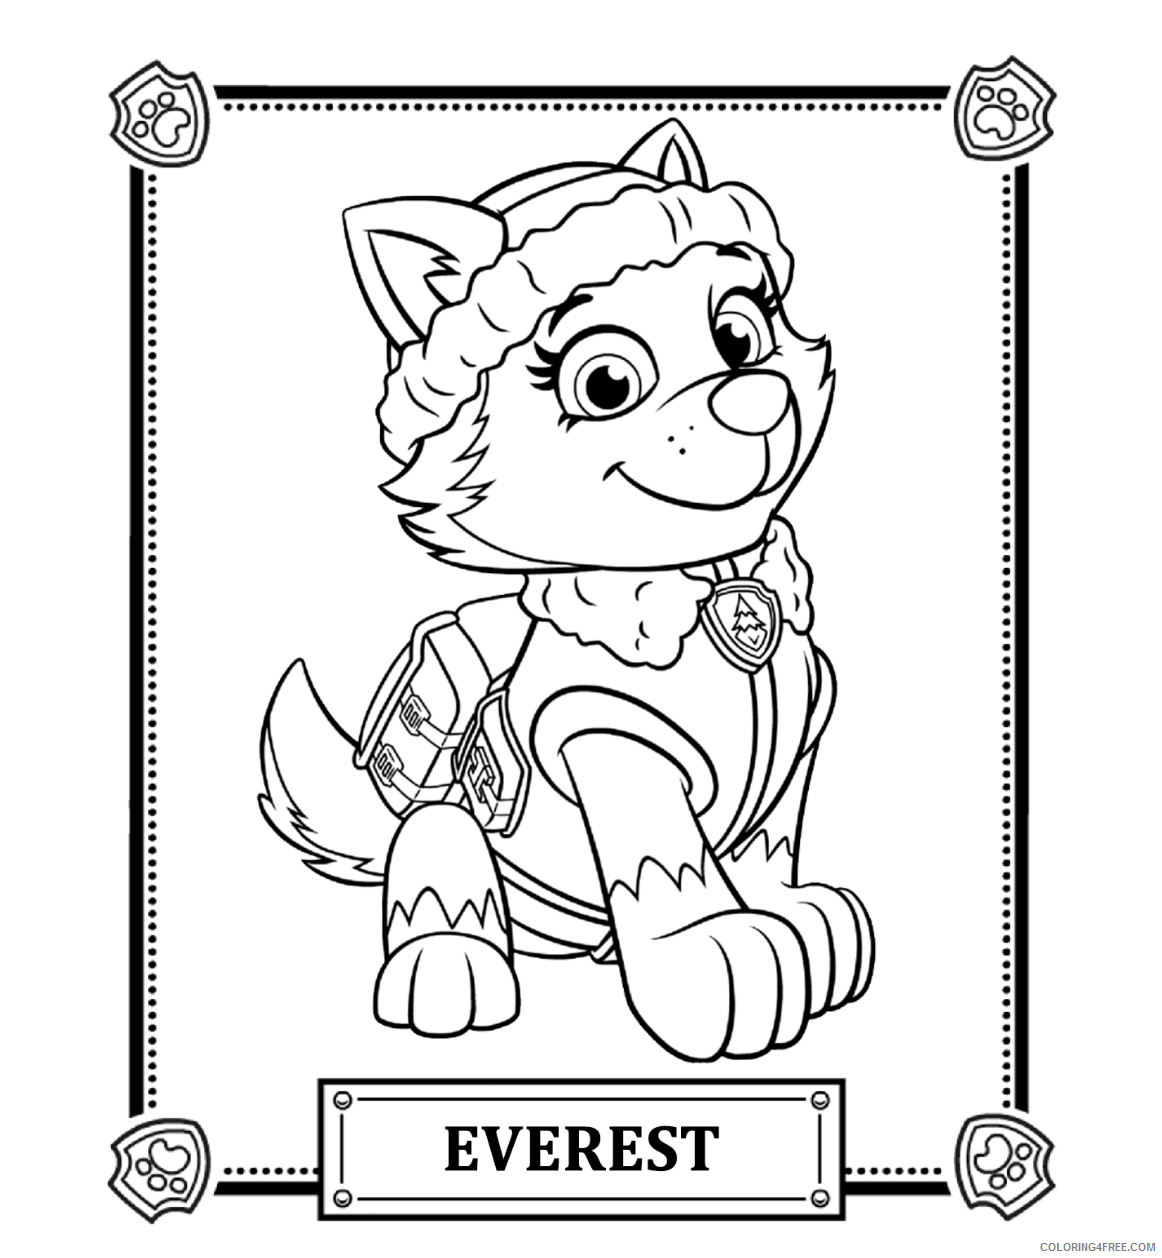 Paw Patrol Coloring Pages TV Film Everest Paw Patrol Printable 2020 05905 Coloring4free